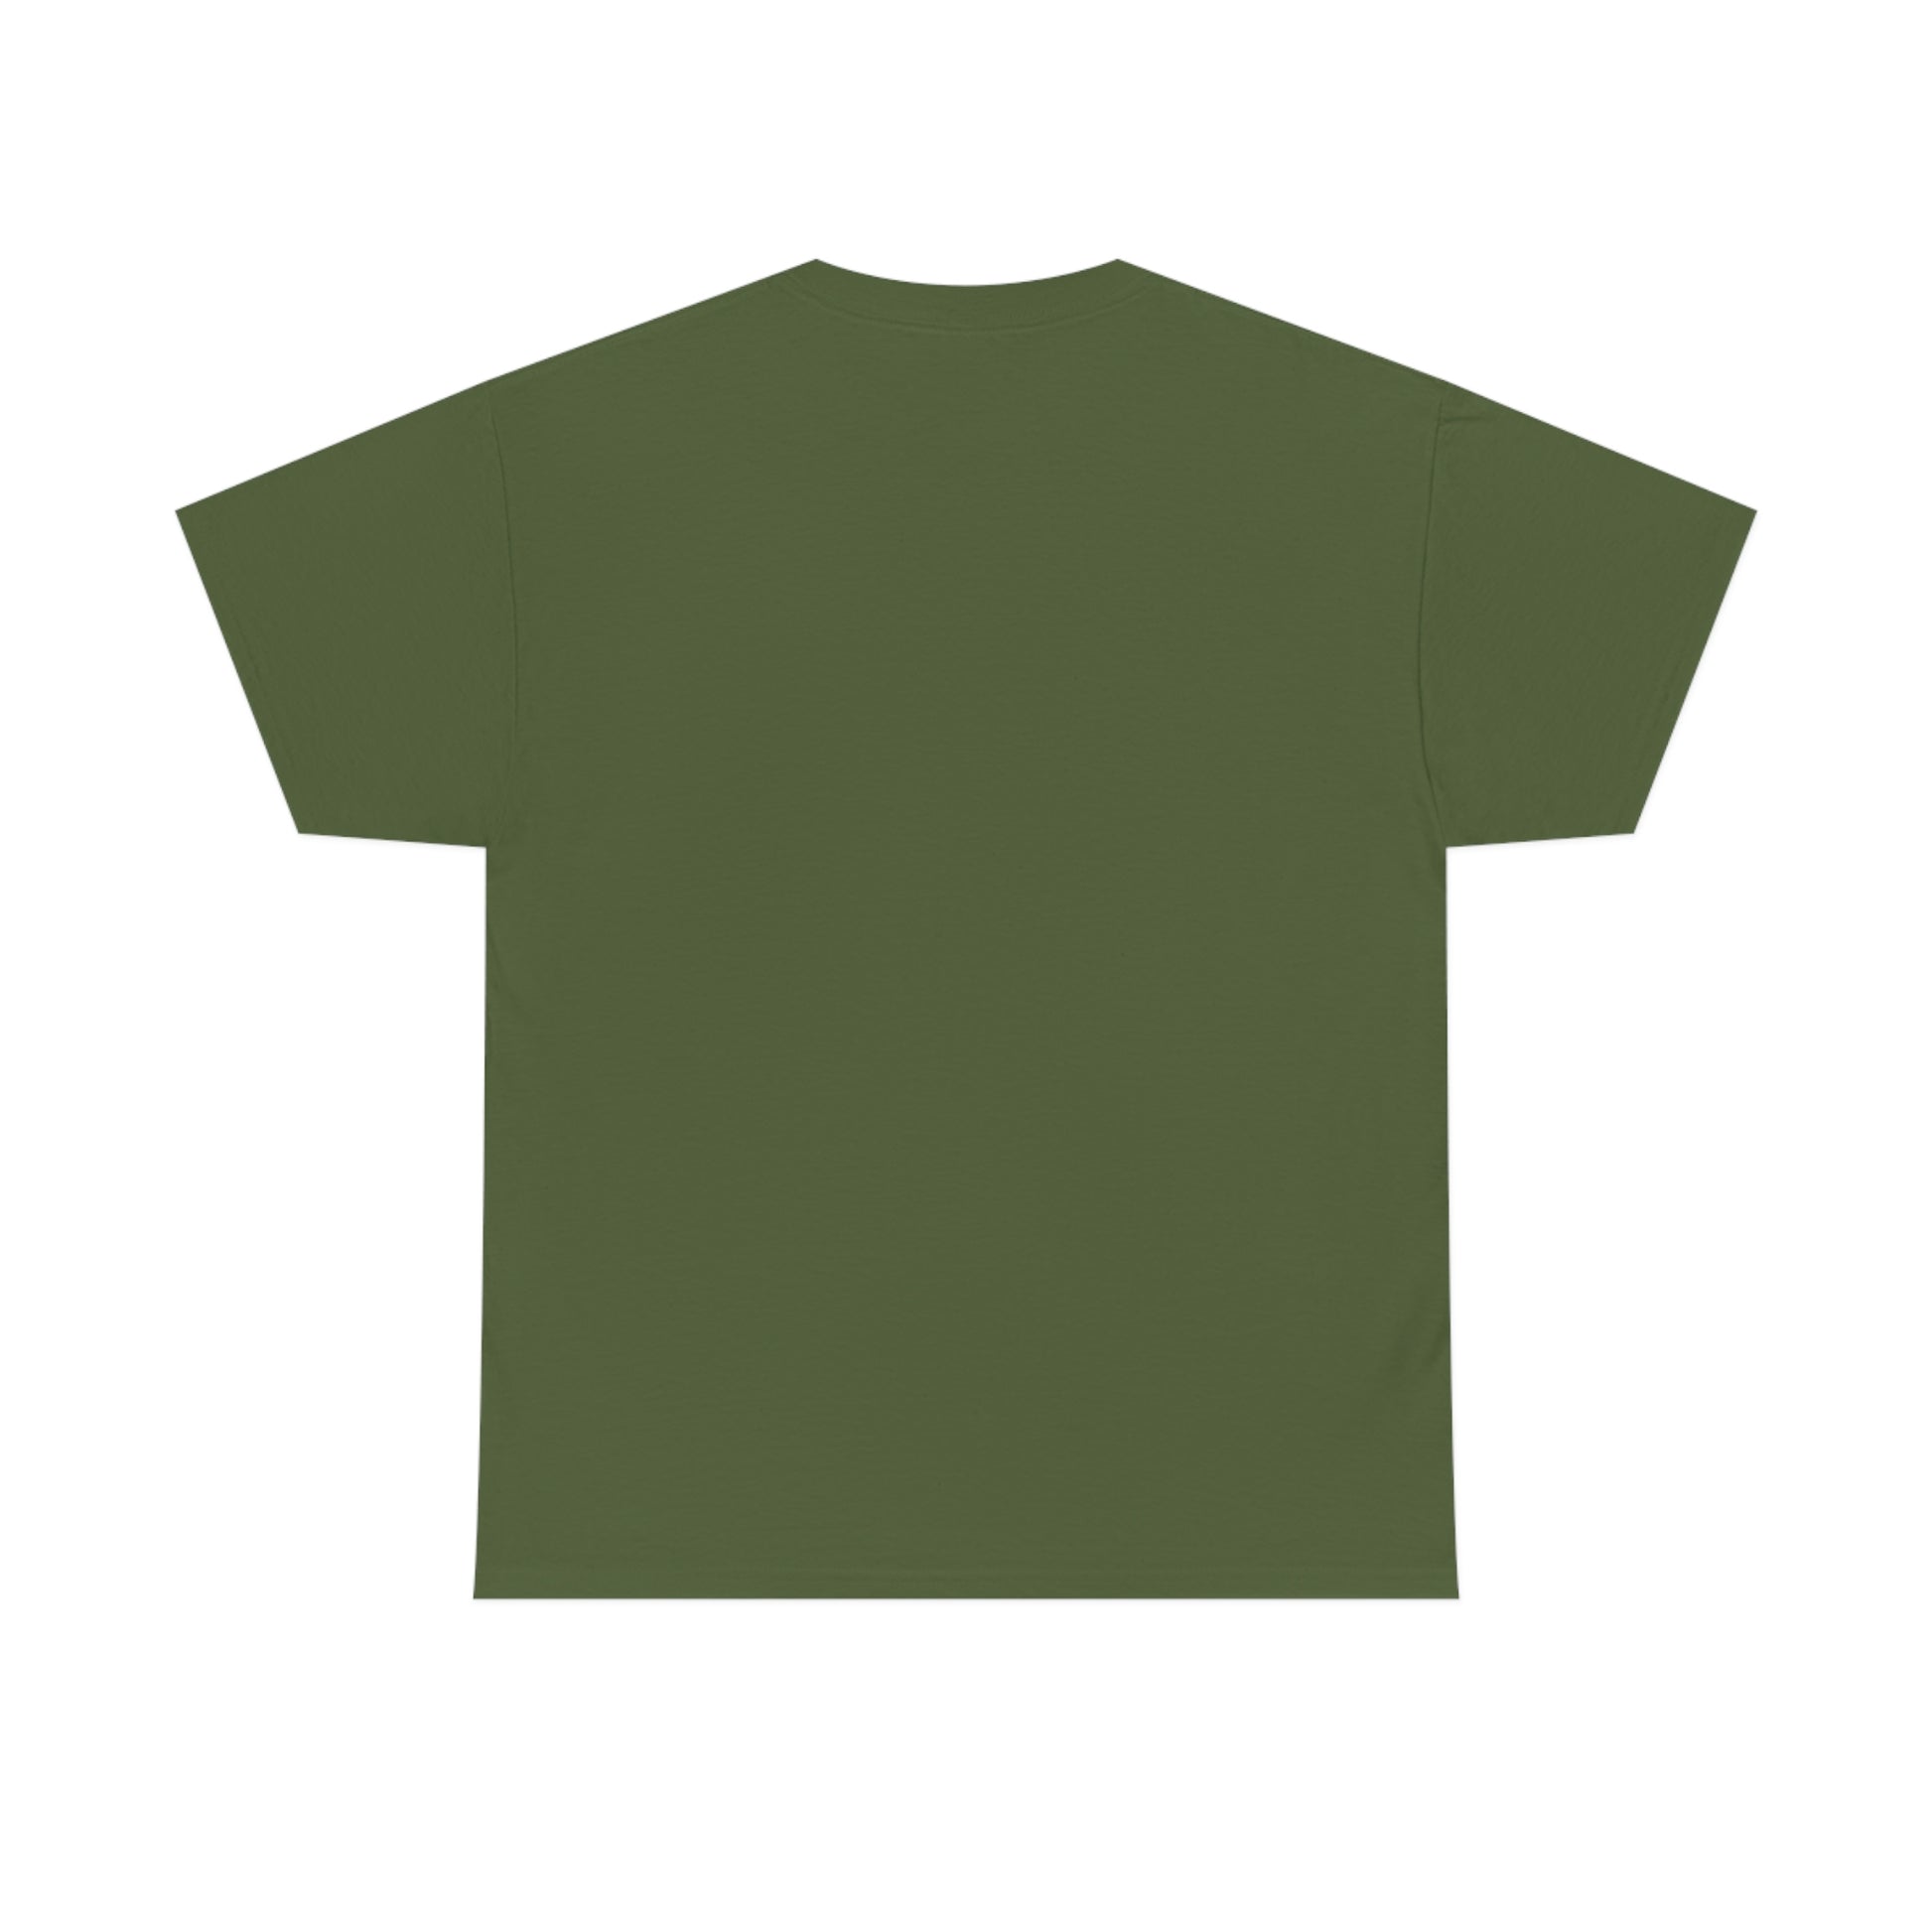 Flat back view of the military green shirt